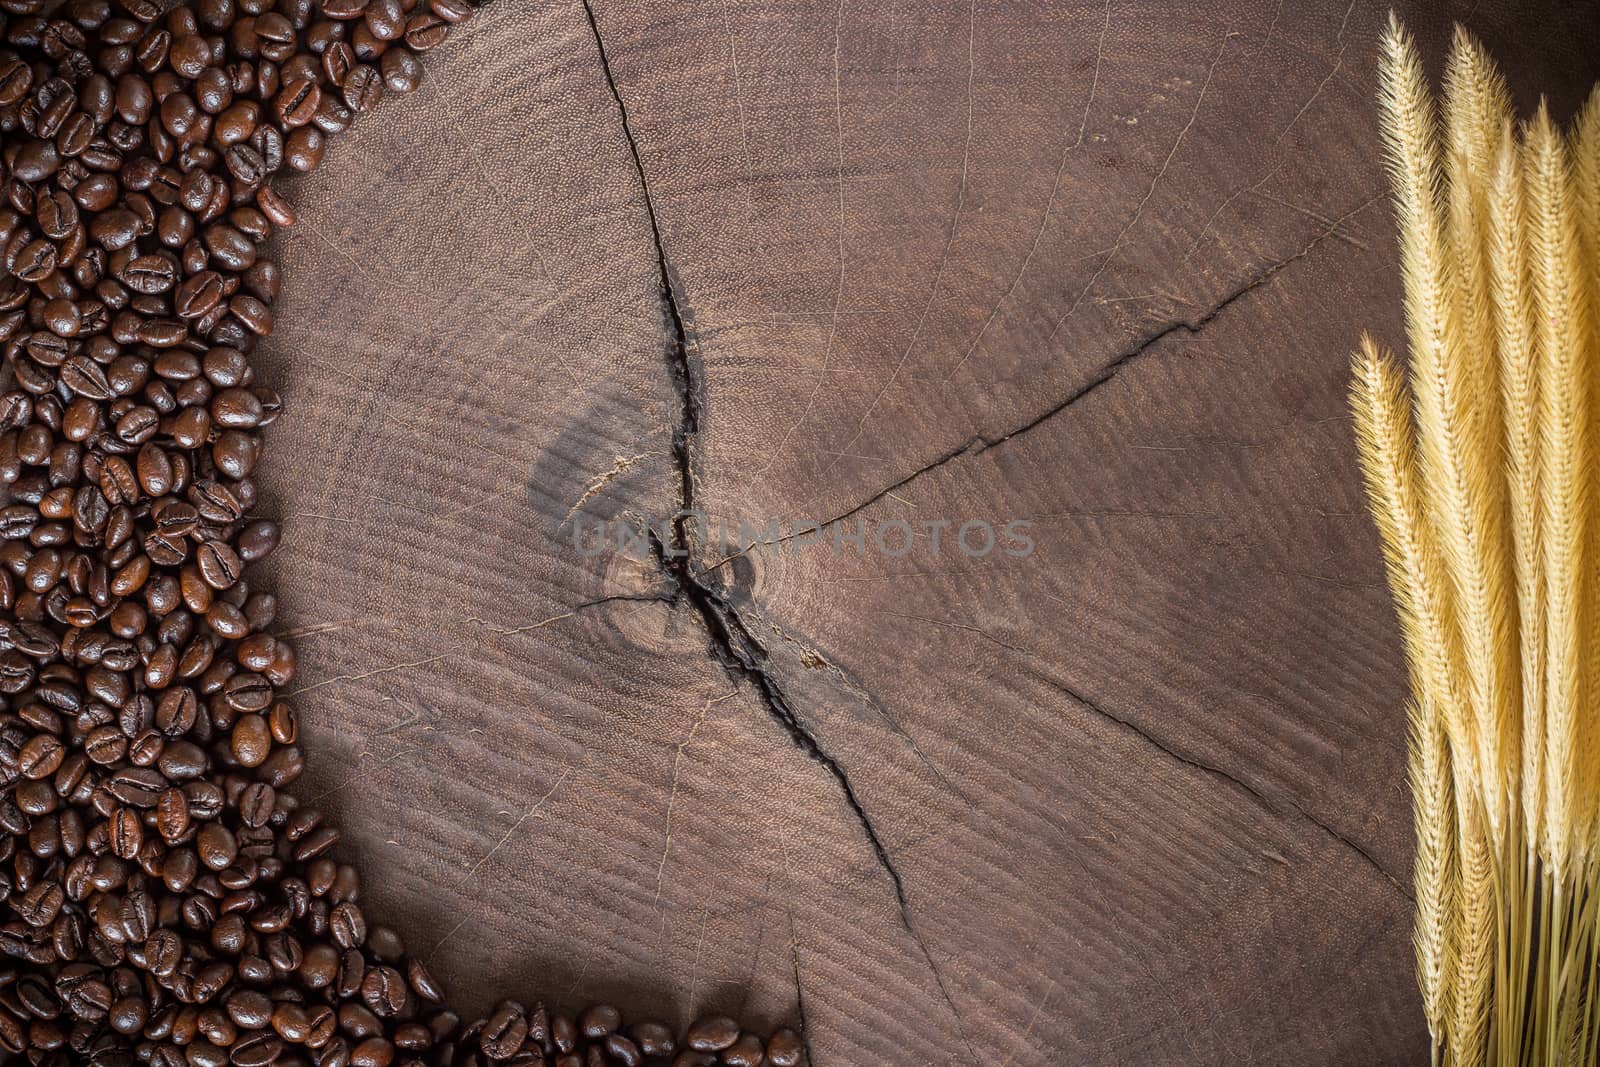 coffee beans on wood stump background by blackzheep